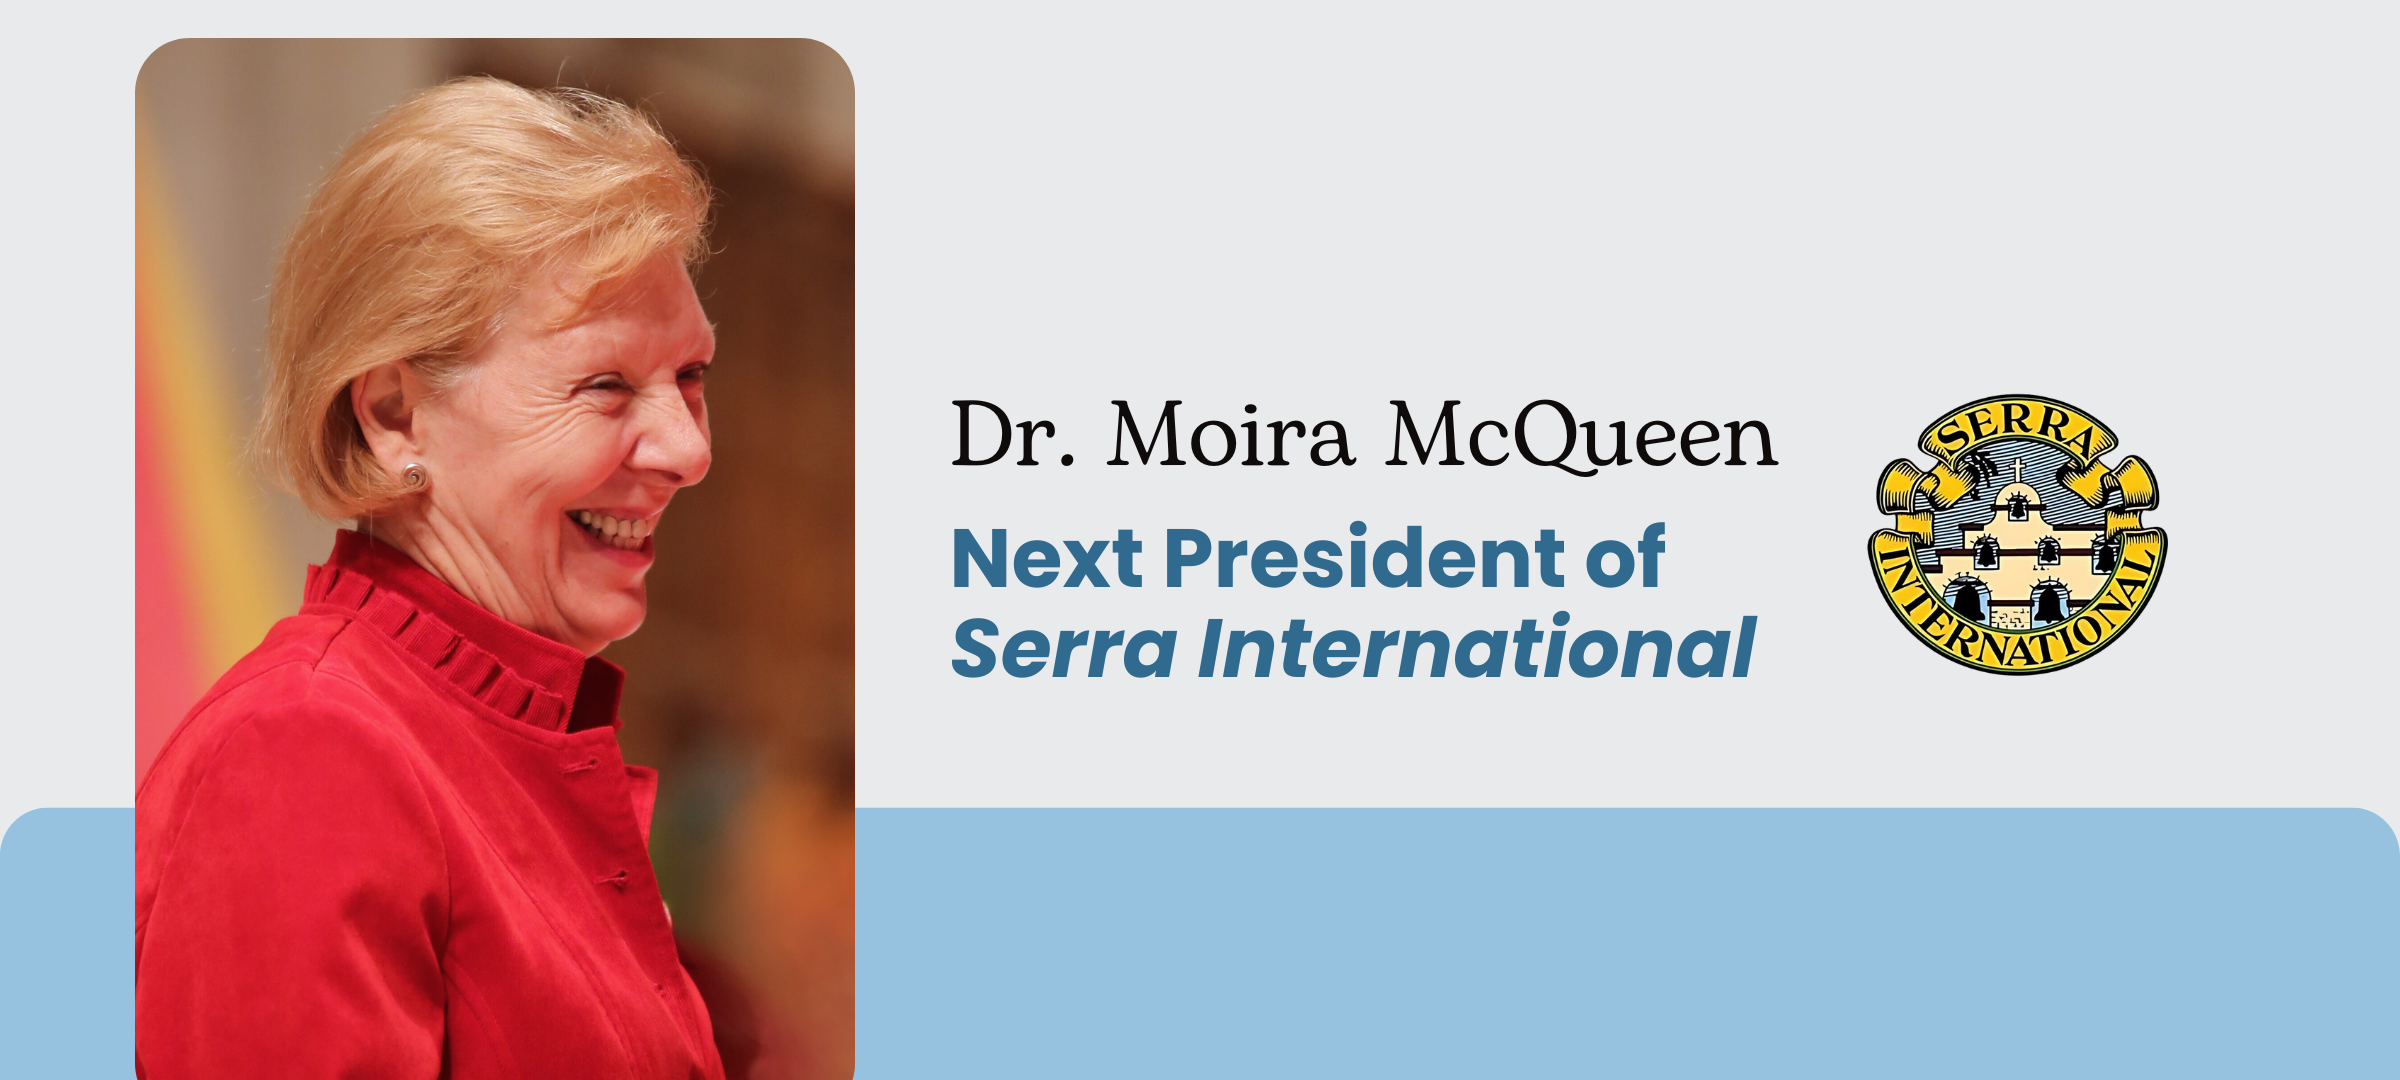 DR. MOIRA MCQUEEN, a parishioner at Christ the King Parish, Hamilton, and Director of the Canadian Catholic Bioethics Institute, will be installed as the next President of Serra International at their August 8-11 conference being held in New Orleans.